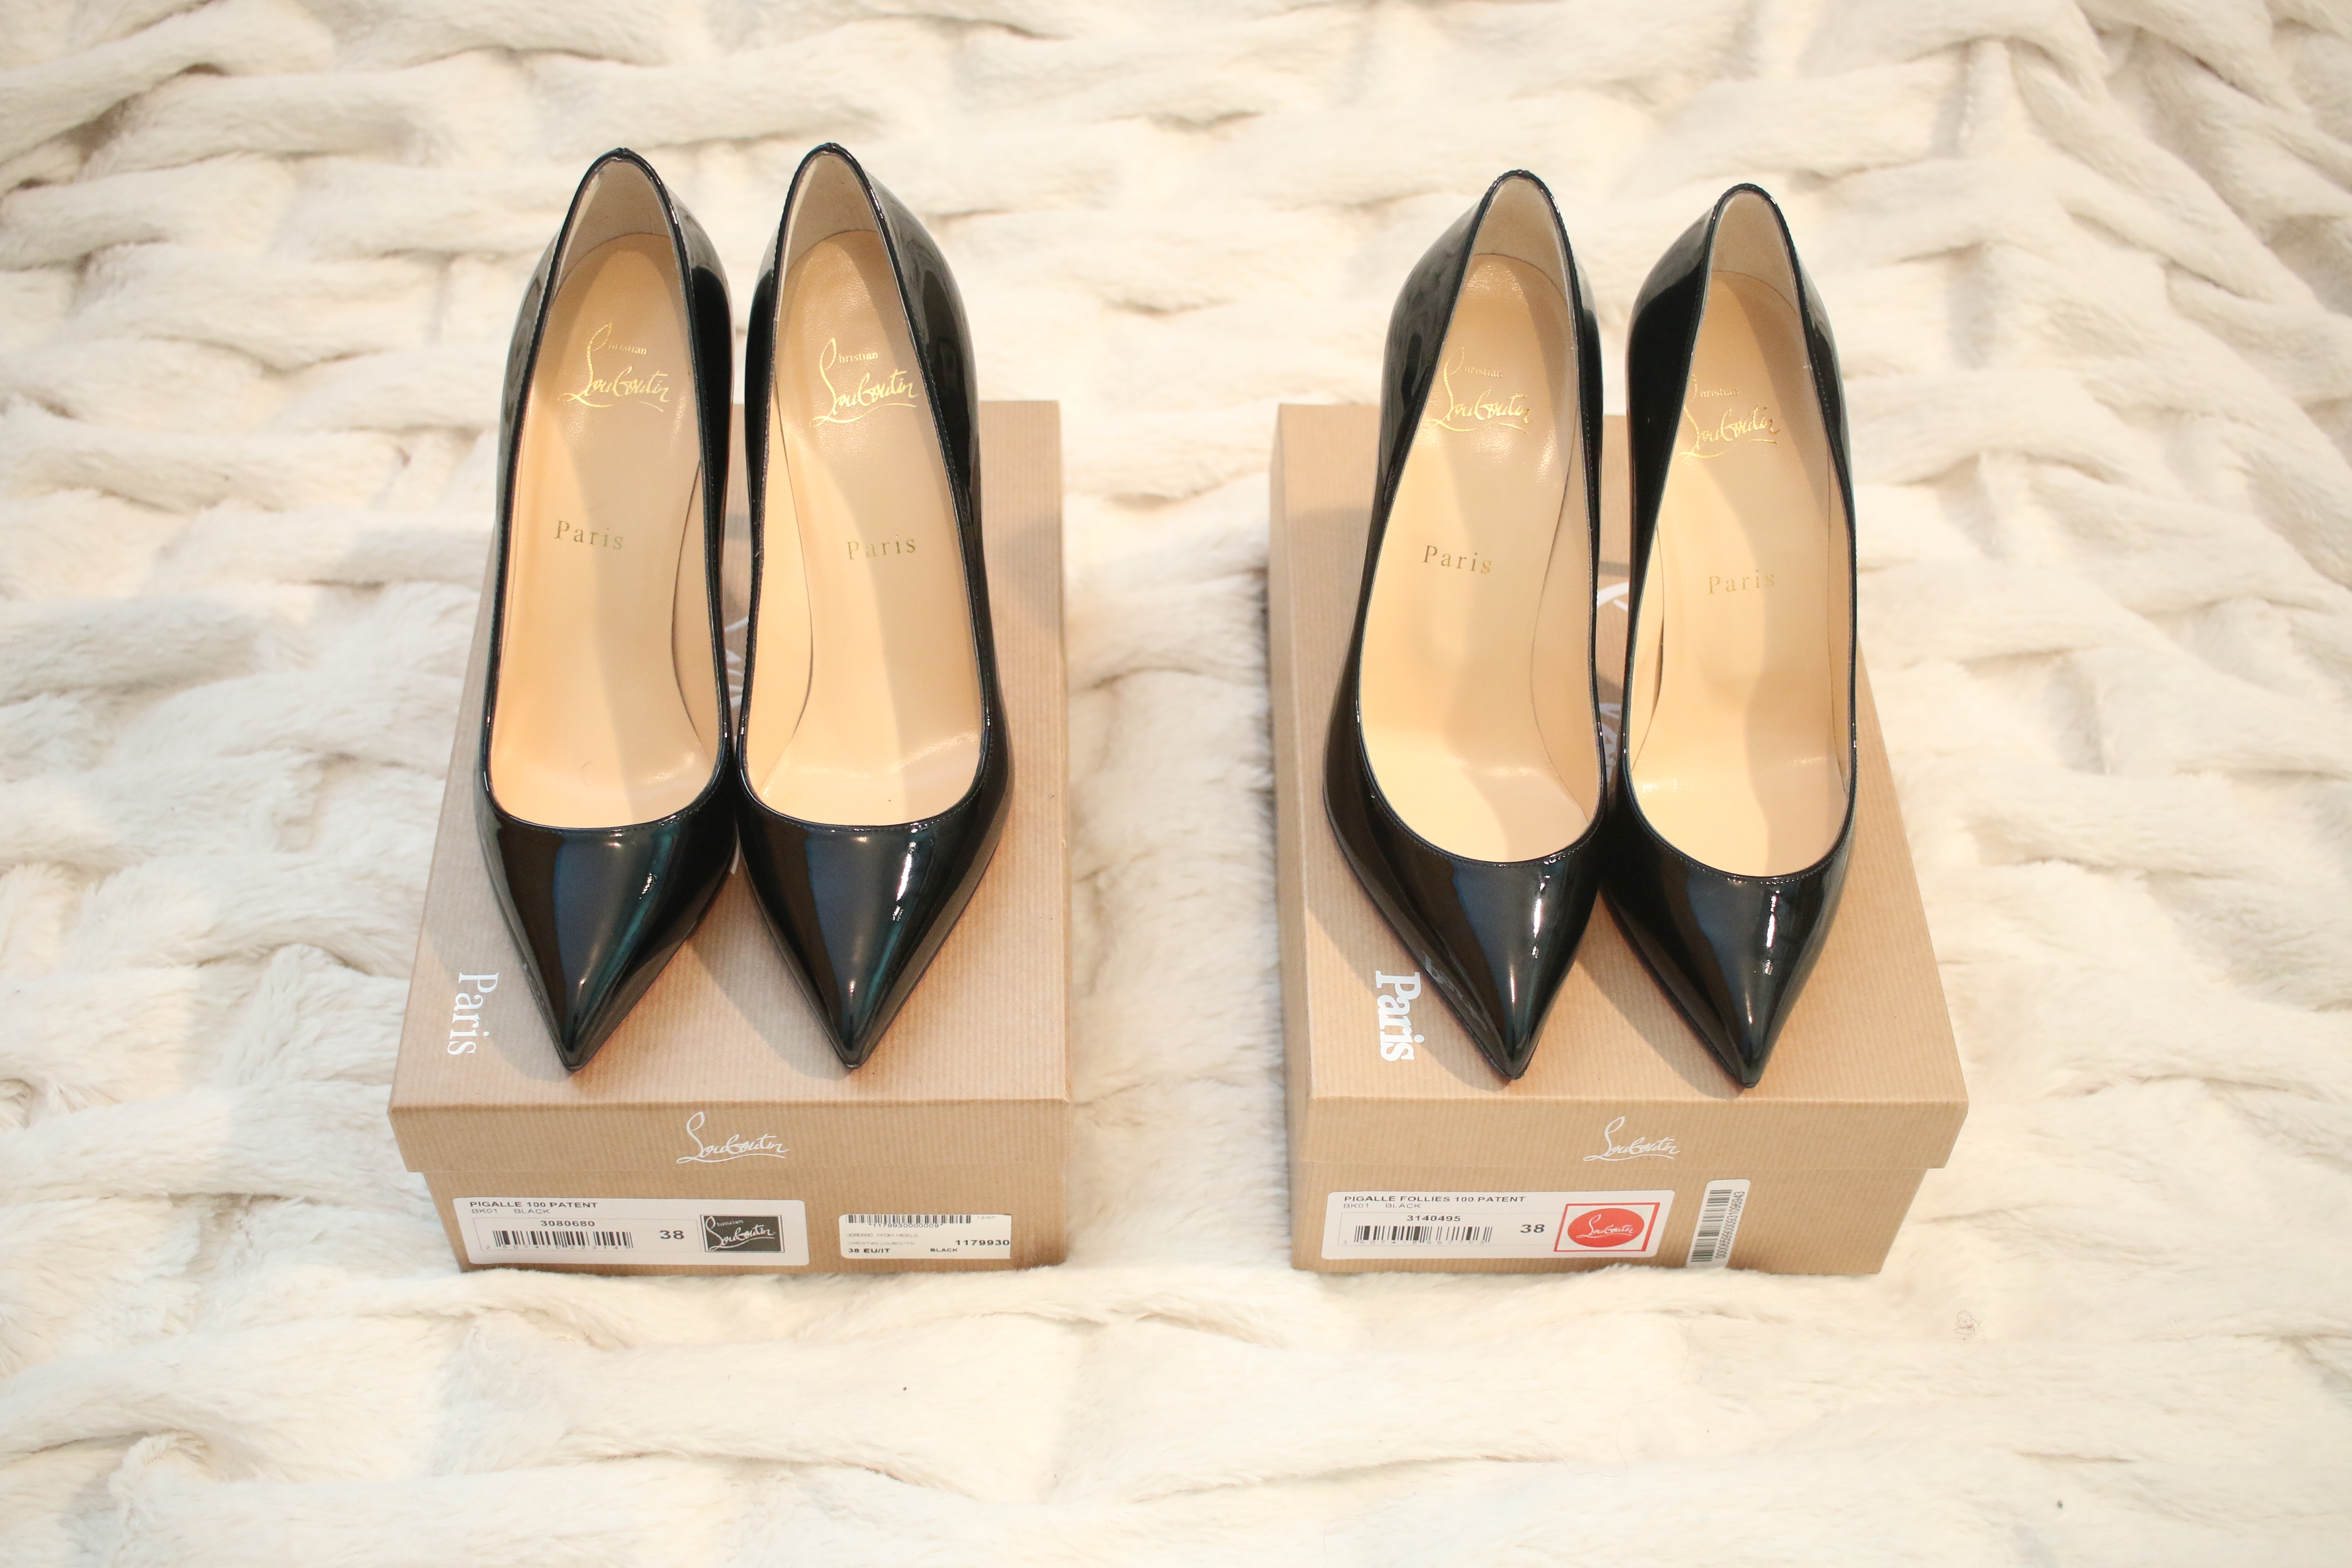 Christian Louboutin Pigalle Review - STYLE OPTIMIST